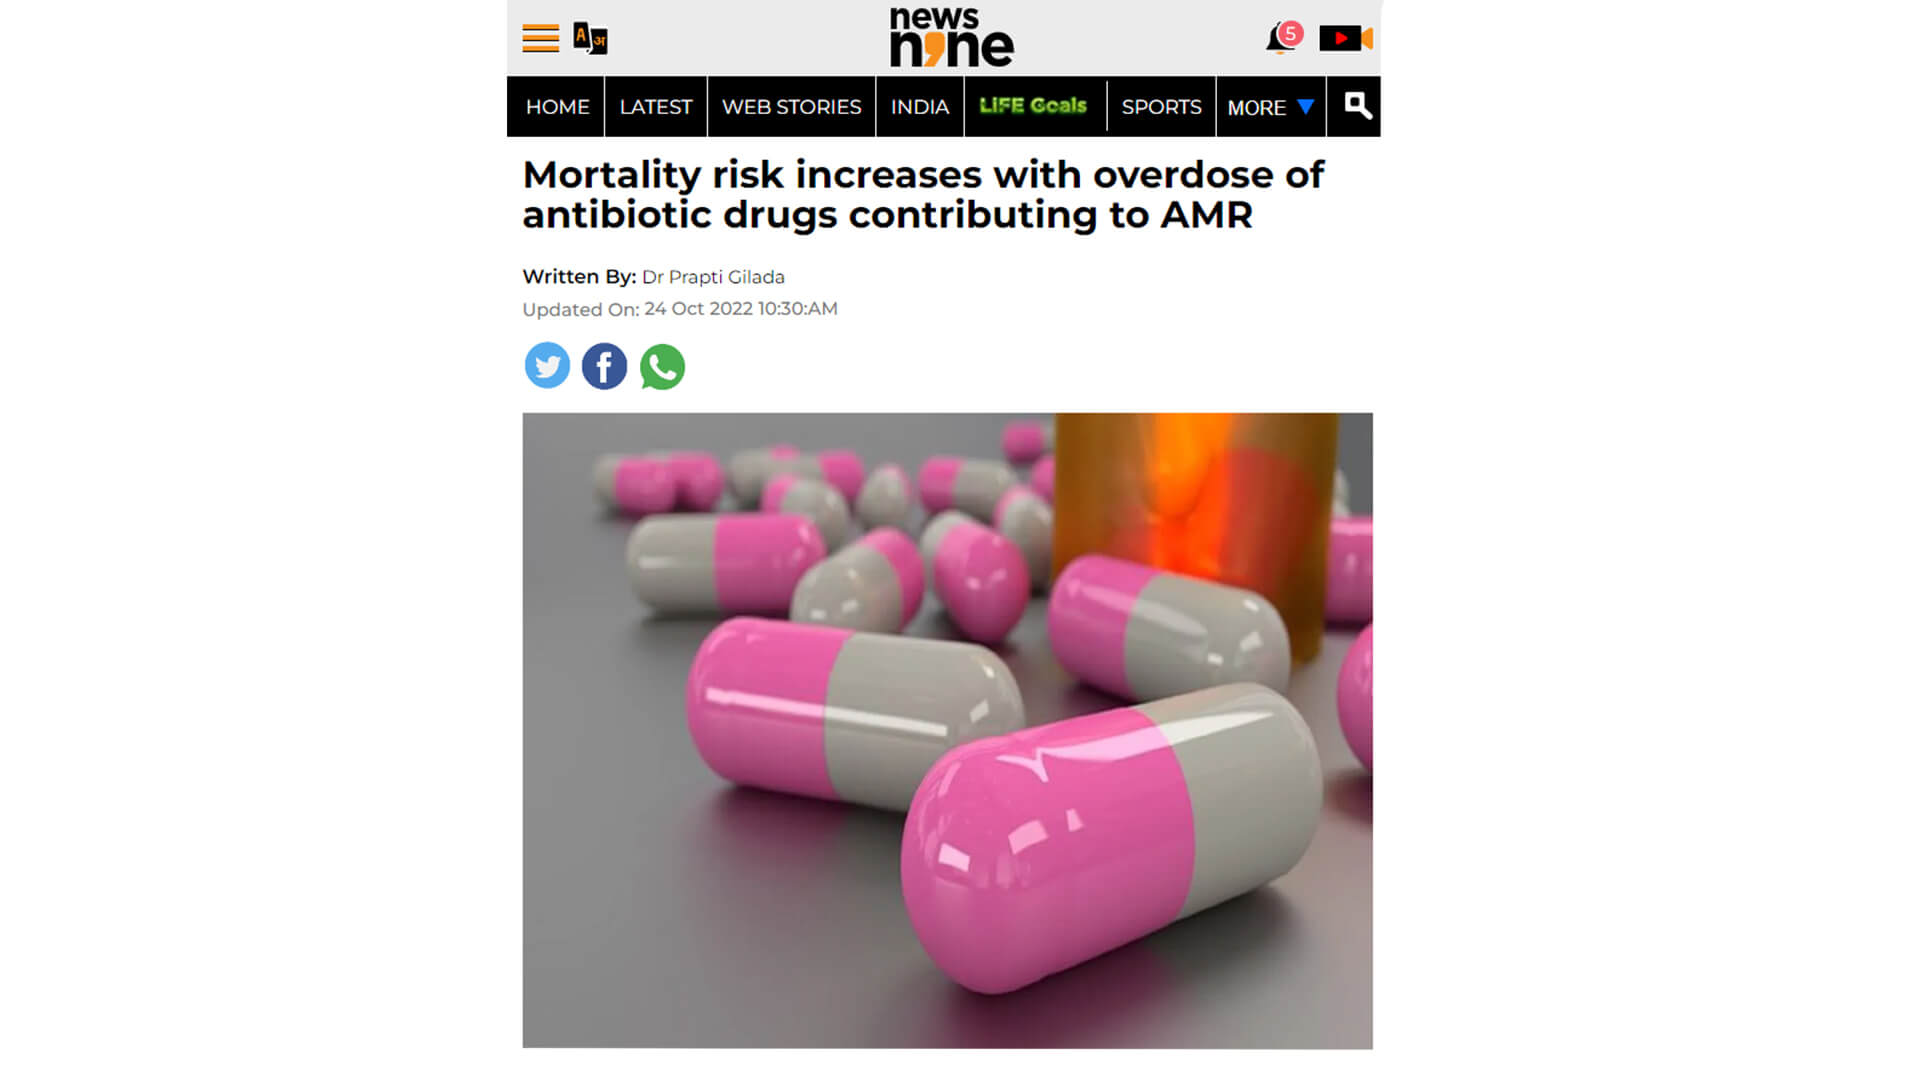 Mortality risk increases with overdose of antibiotic drugs contributing to AMR